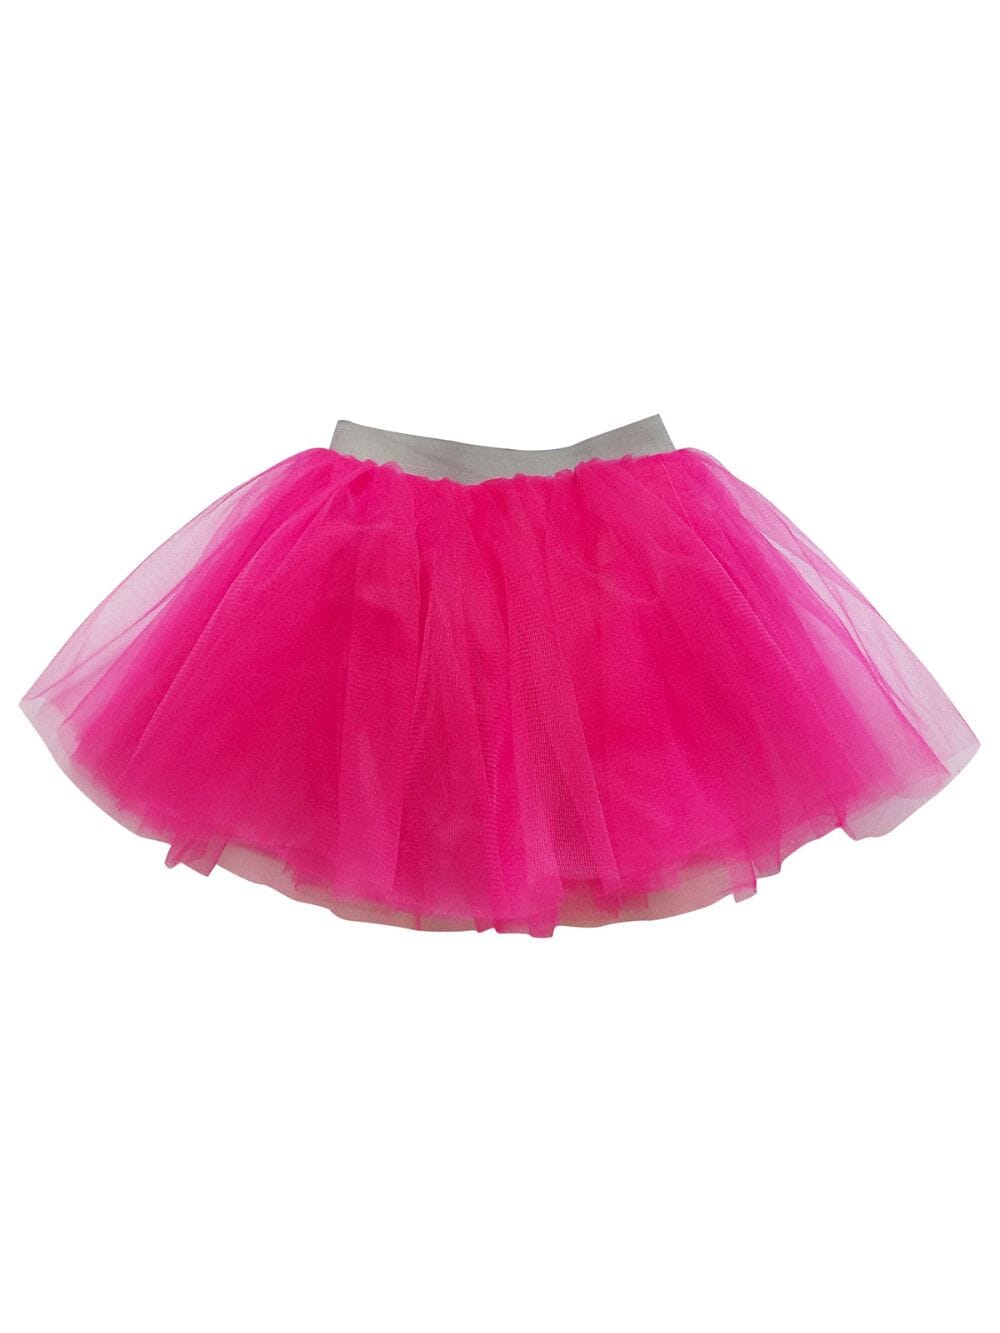 Sydney So Sweet Size Chart and Tutu Skirt Measuring Guides